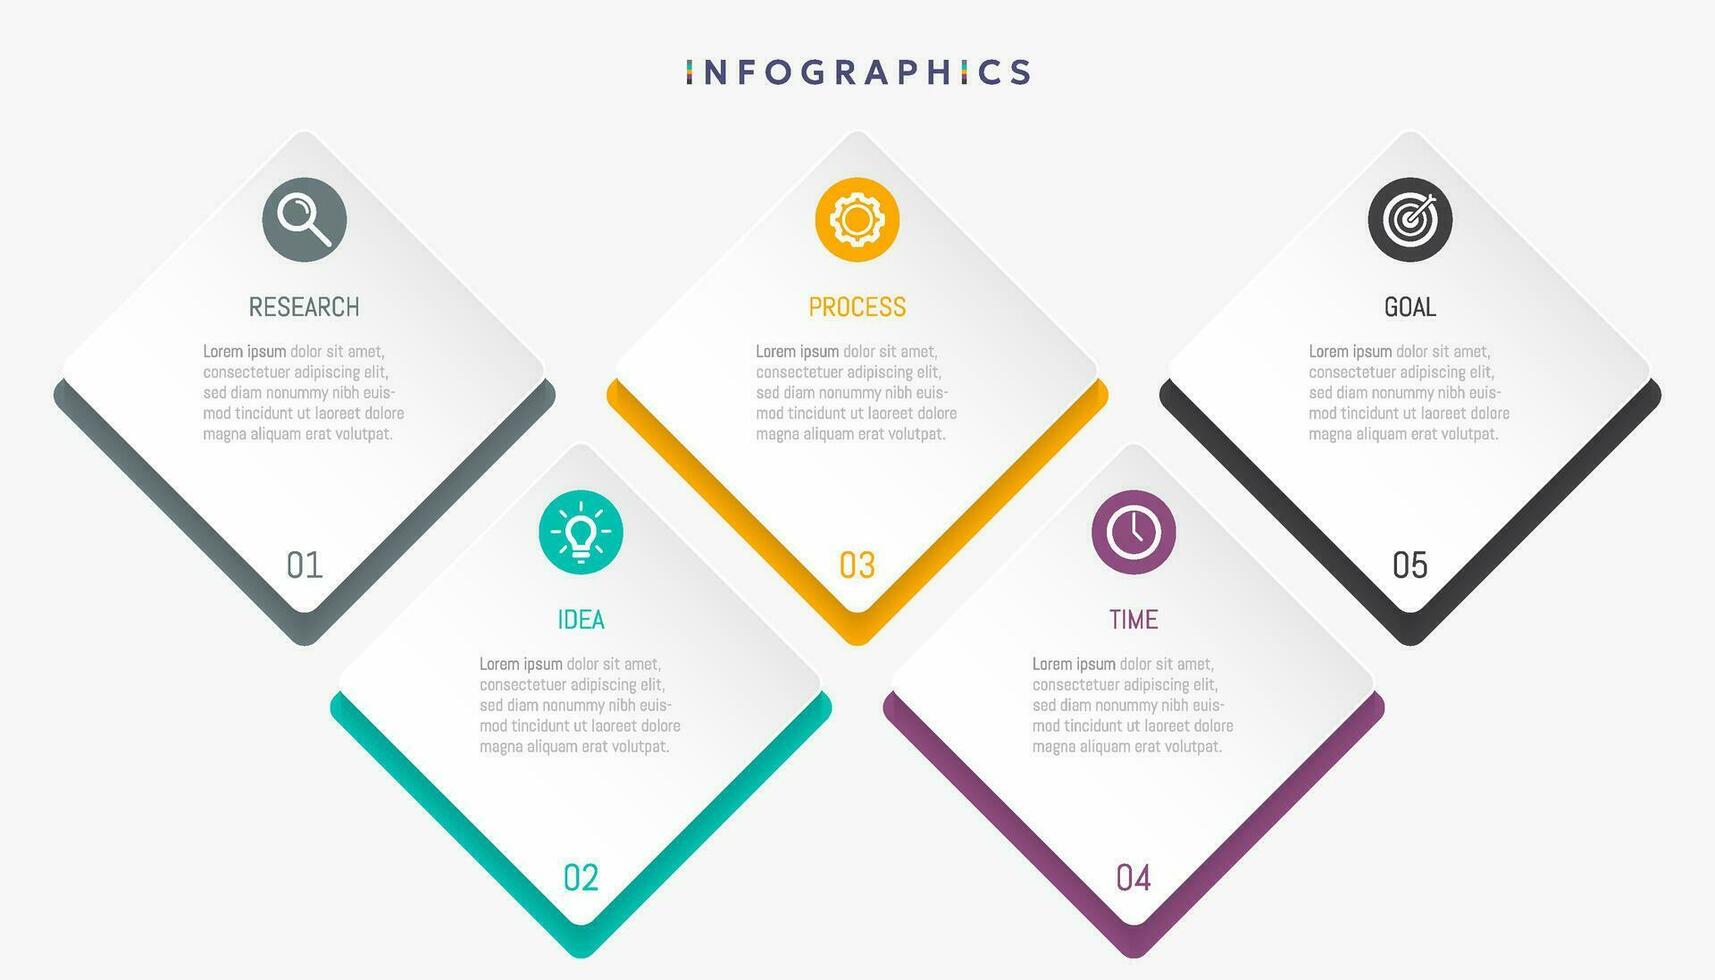 Modern business infographic template, square shape with 5 options or steps icons. vector